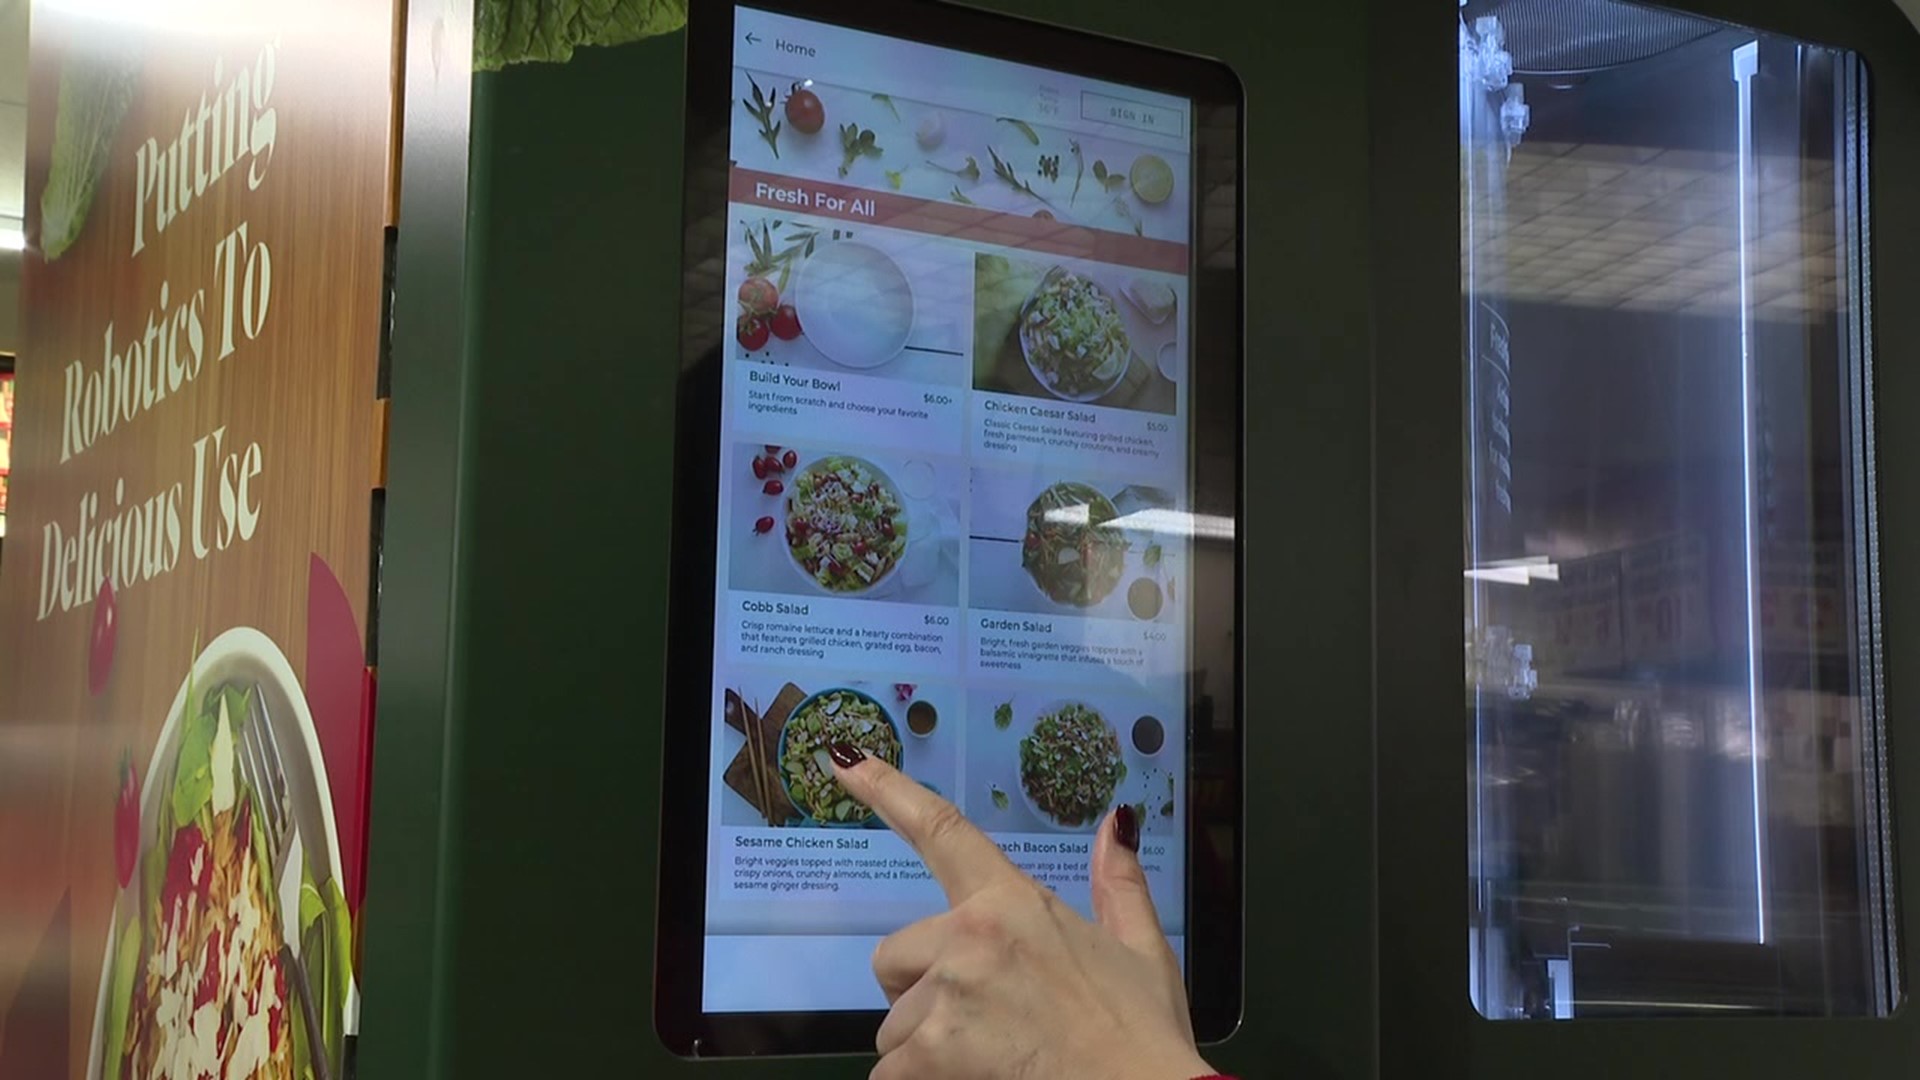 The fresh food robot, made by Chowbotics works with over 20 ingredients to create a salad in 90 seconds.